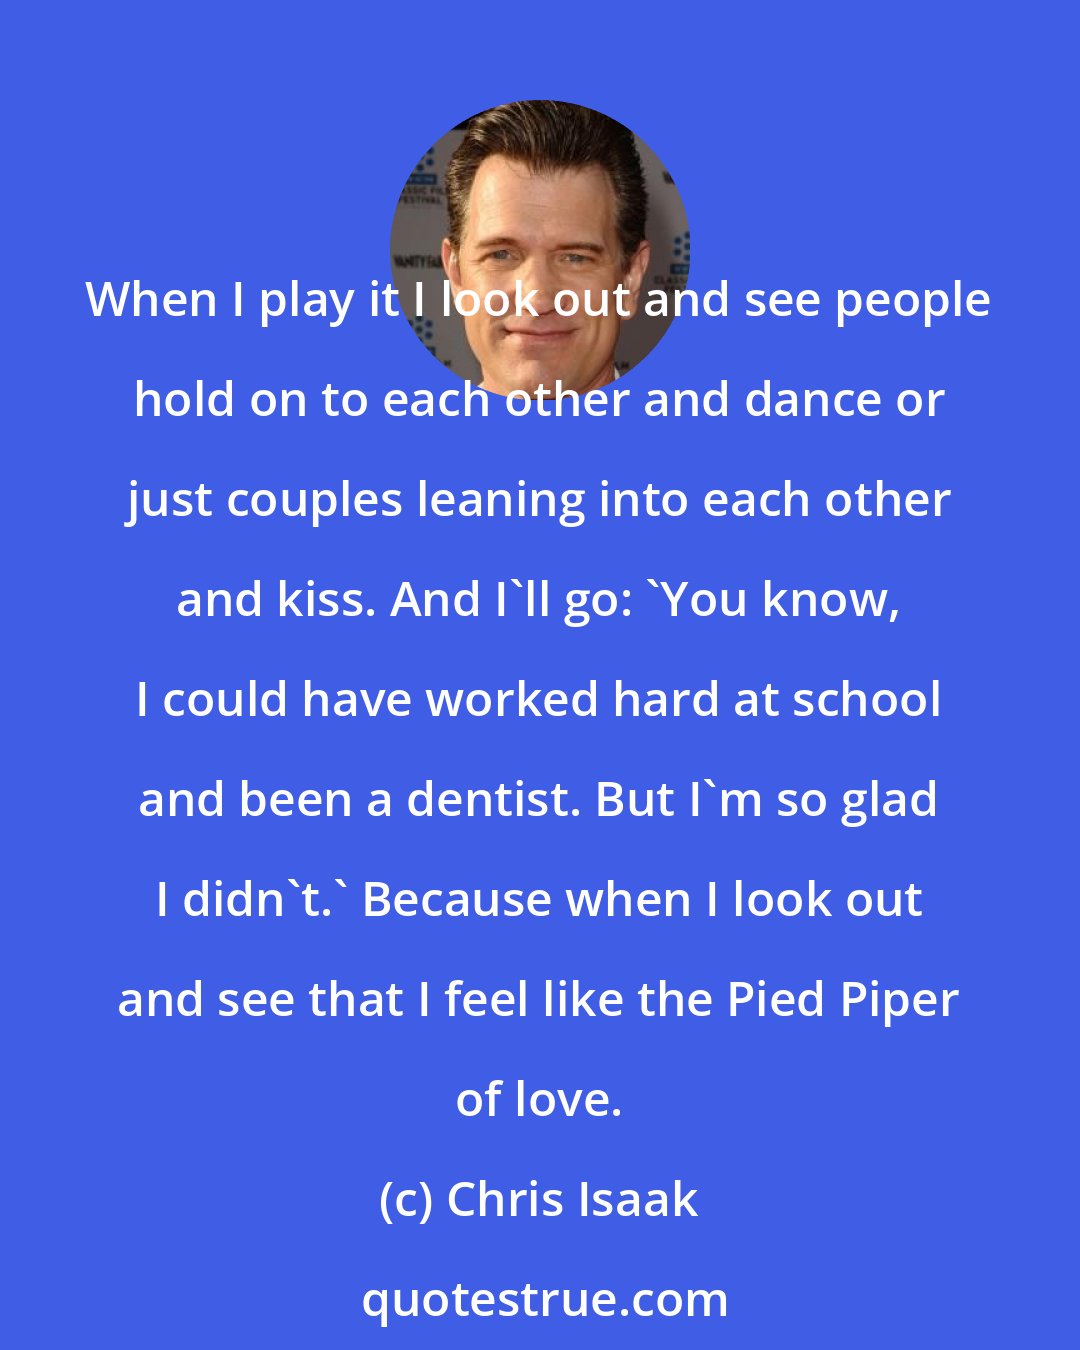 Chris Isaak: When I play it I look out and see people hold on to each other and dance or just couples leaning into each other and kiss. And I'll go: 'You know, I could have worked hard at school and been a dentist. But I'm so glad I didn't.' Because when I look out and see that I feel like the Pied Piper of love.